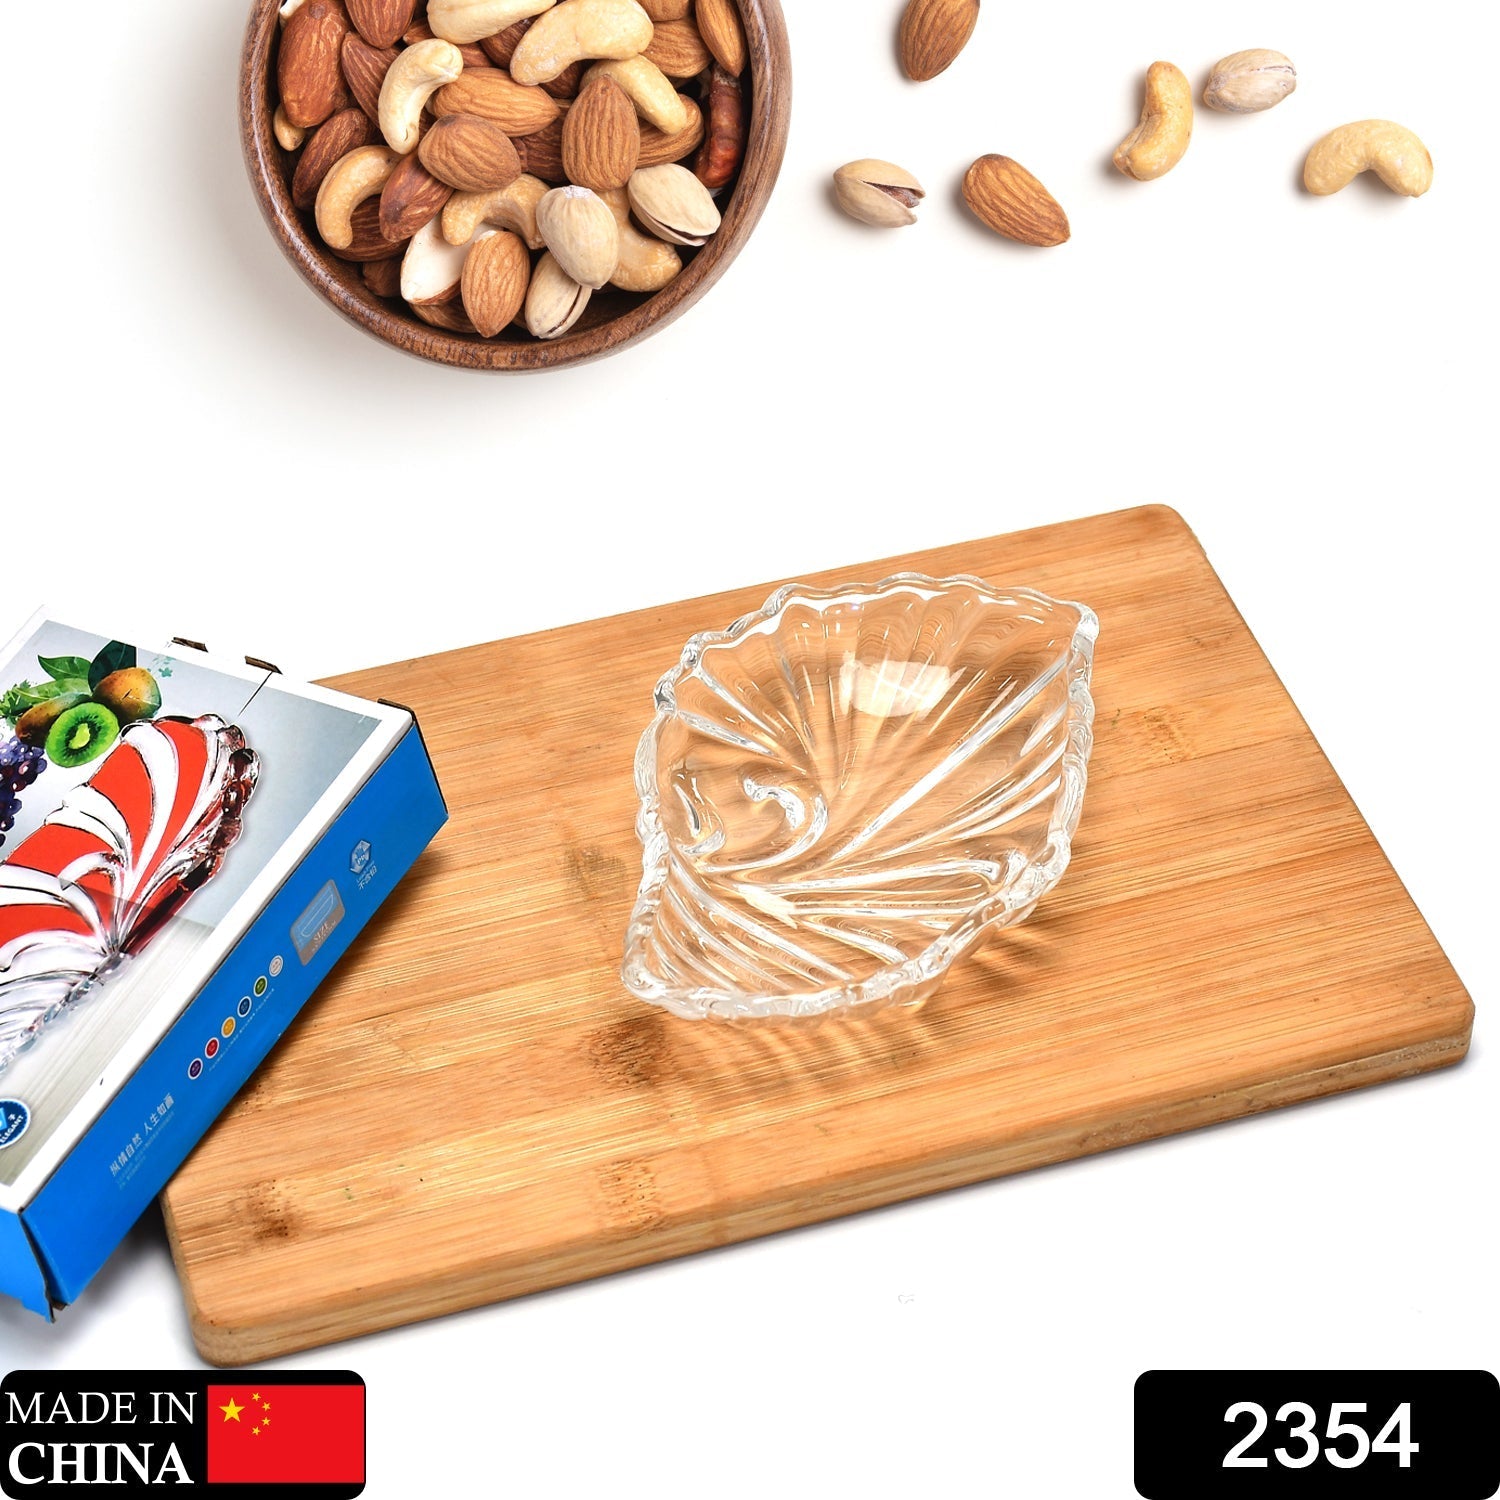 2354 Leaf shaped Glass Serve tray of snacks, Mukhwaas, and ice cream. 